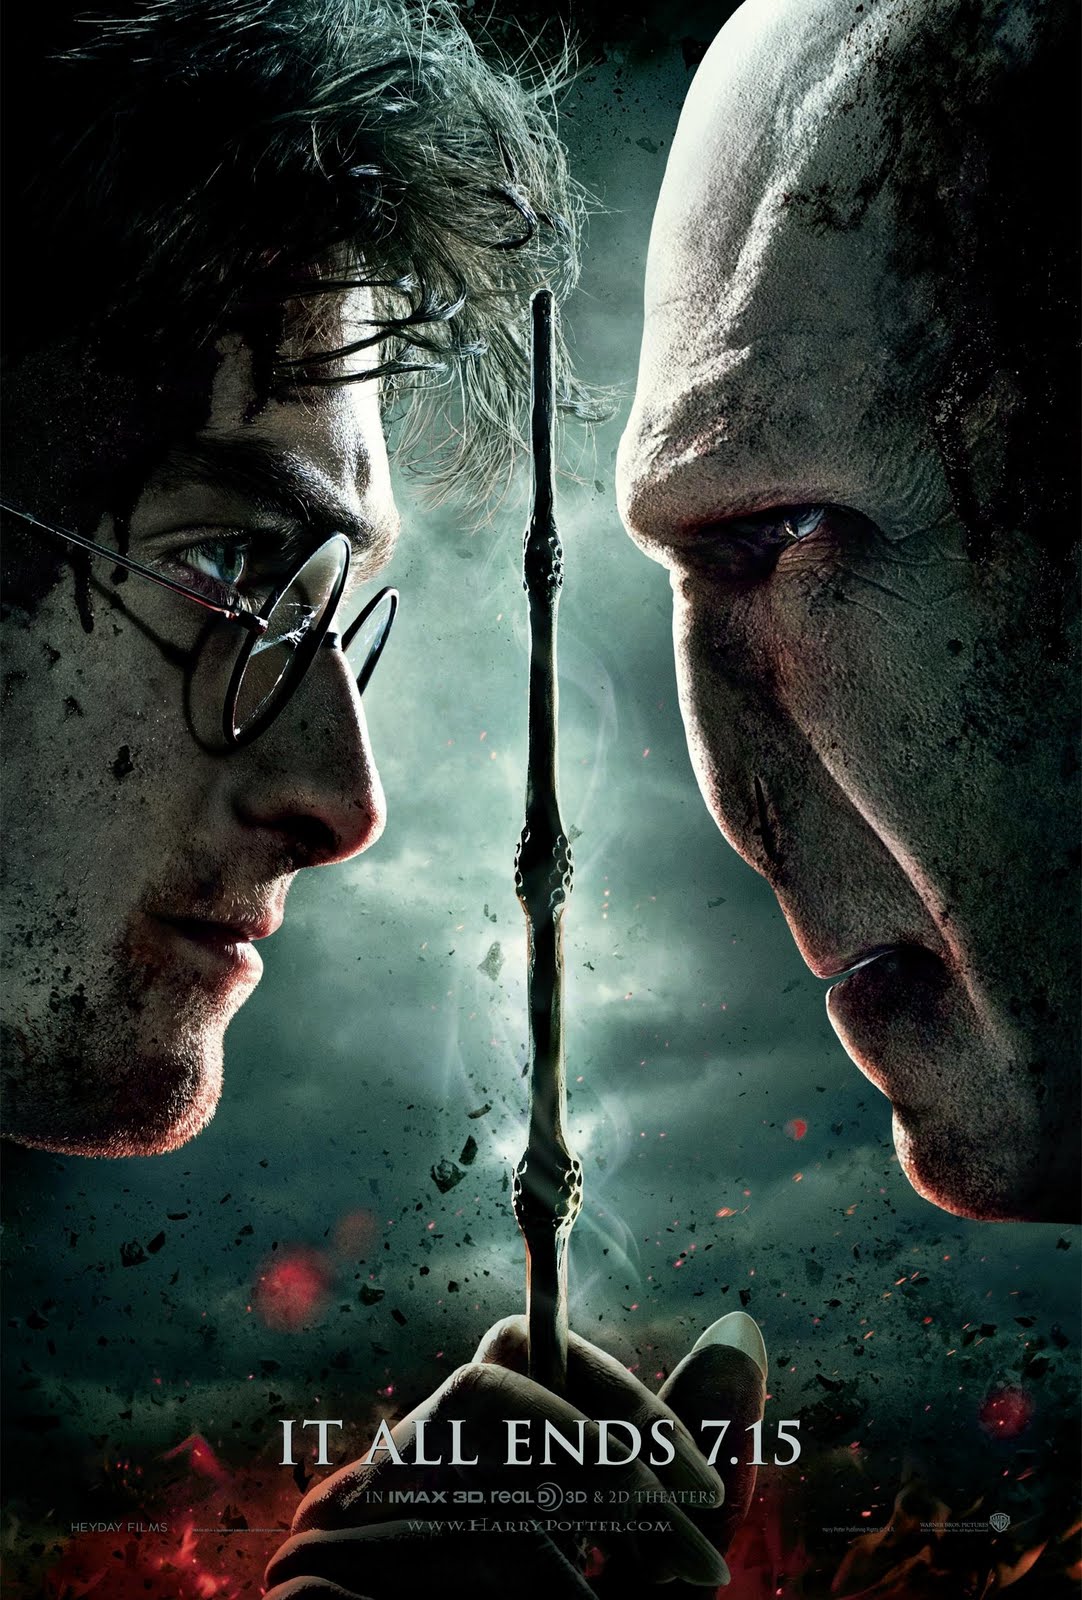 [Harry-Potter-and-the-Deathly-Hallows%255B1%255D.jpg]